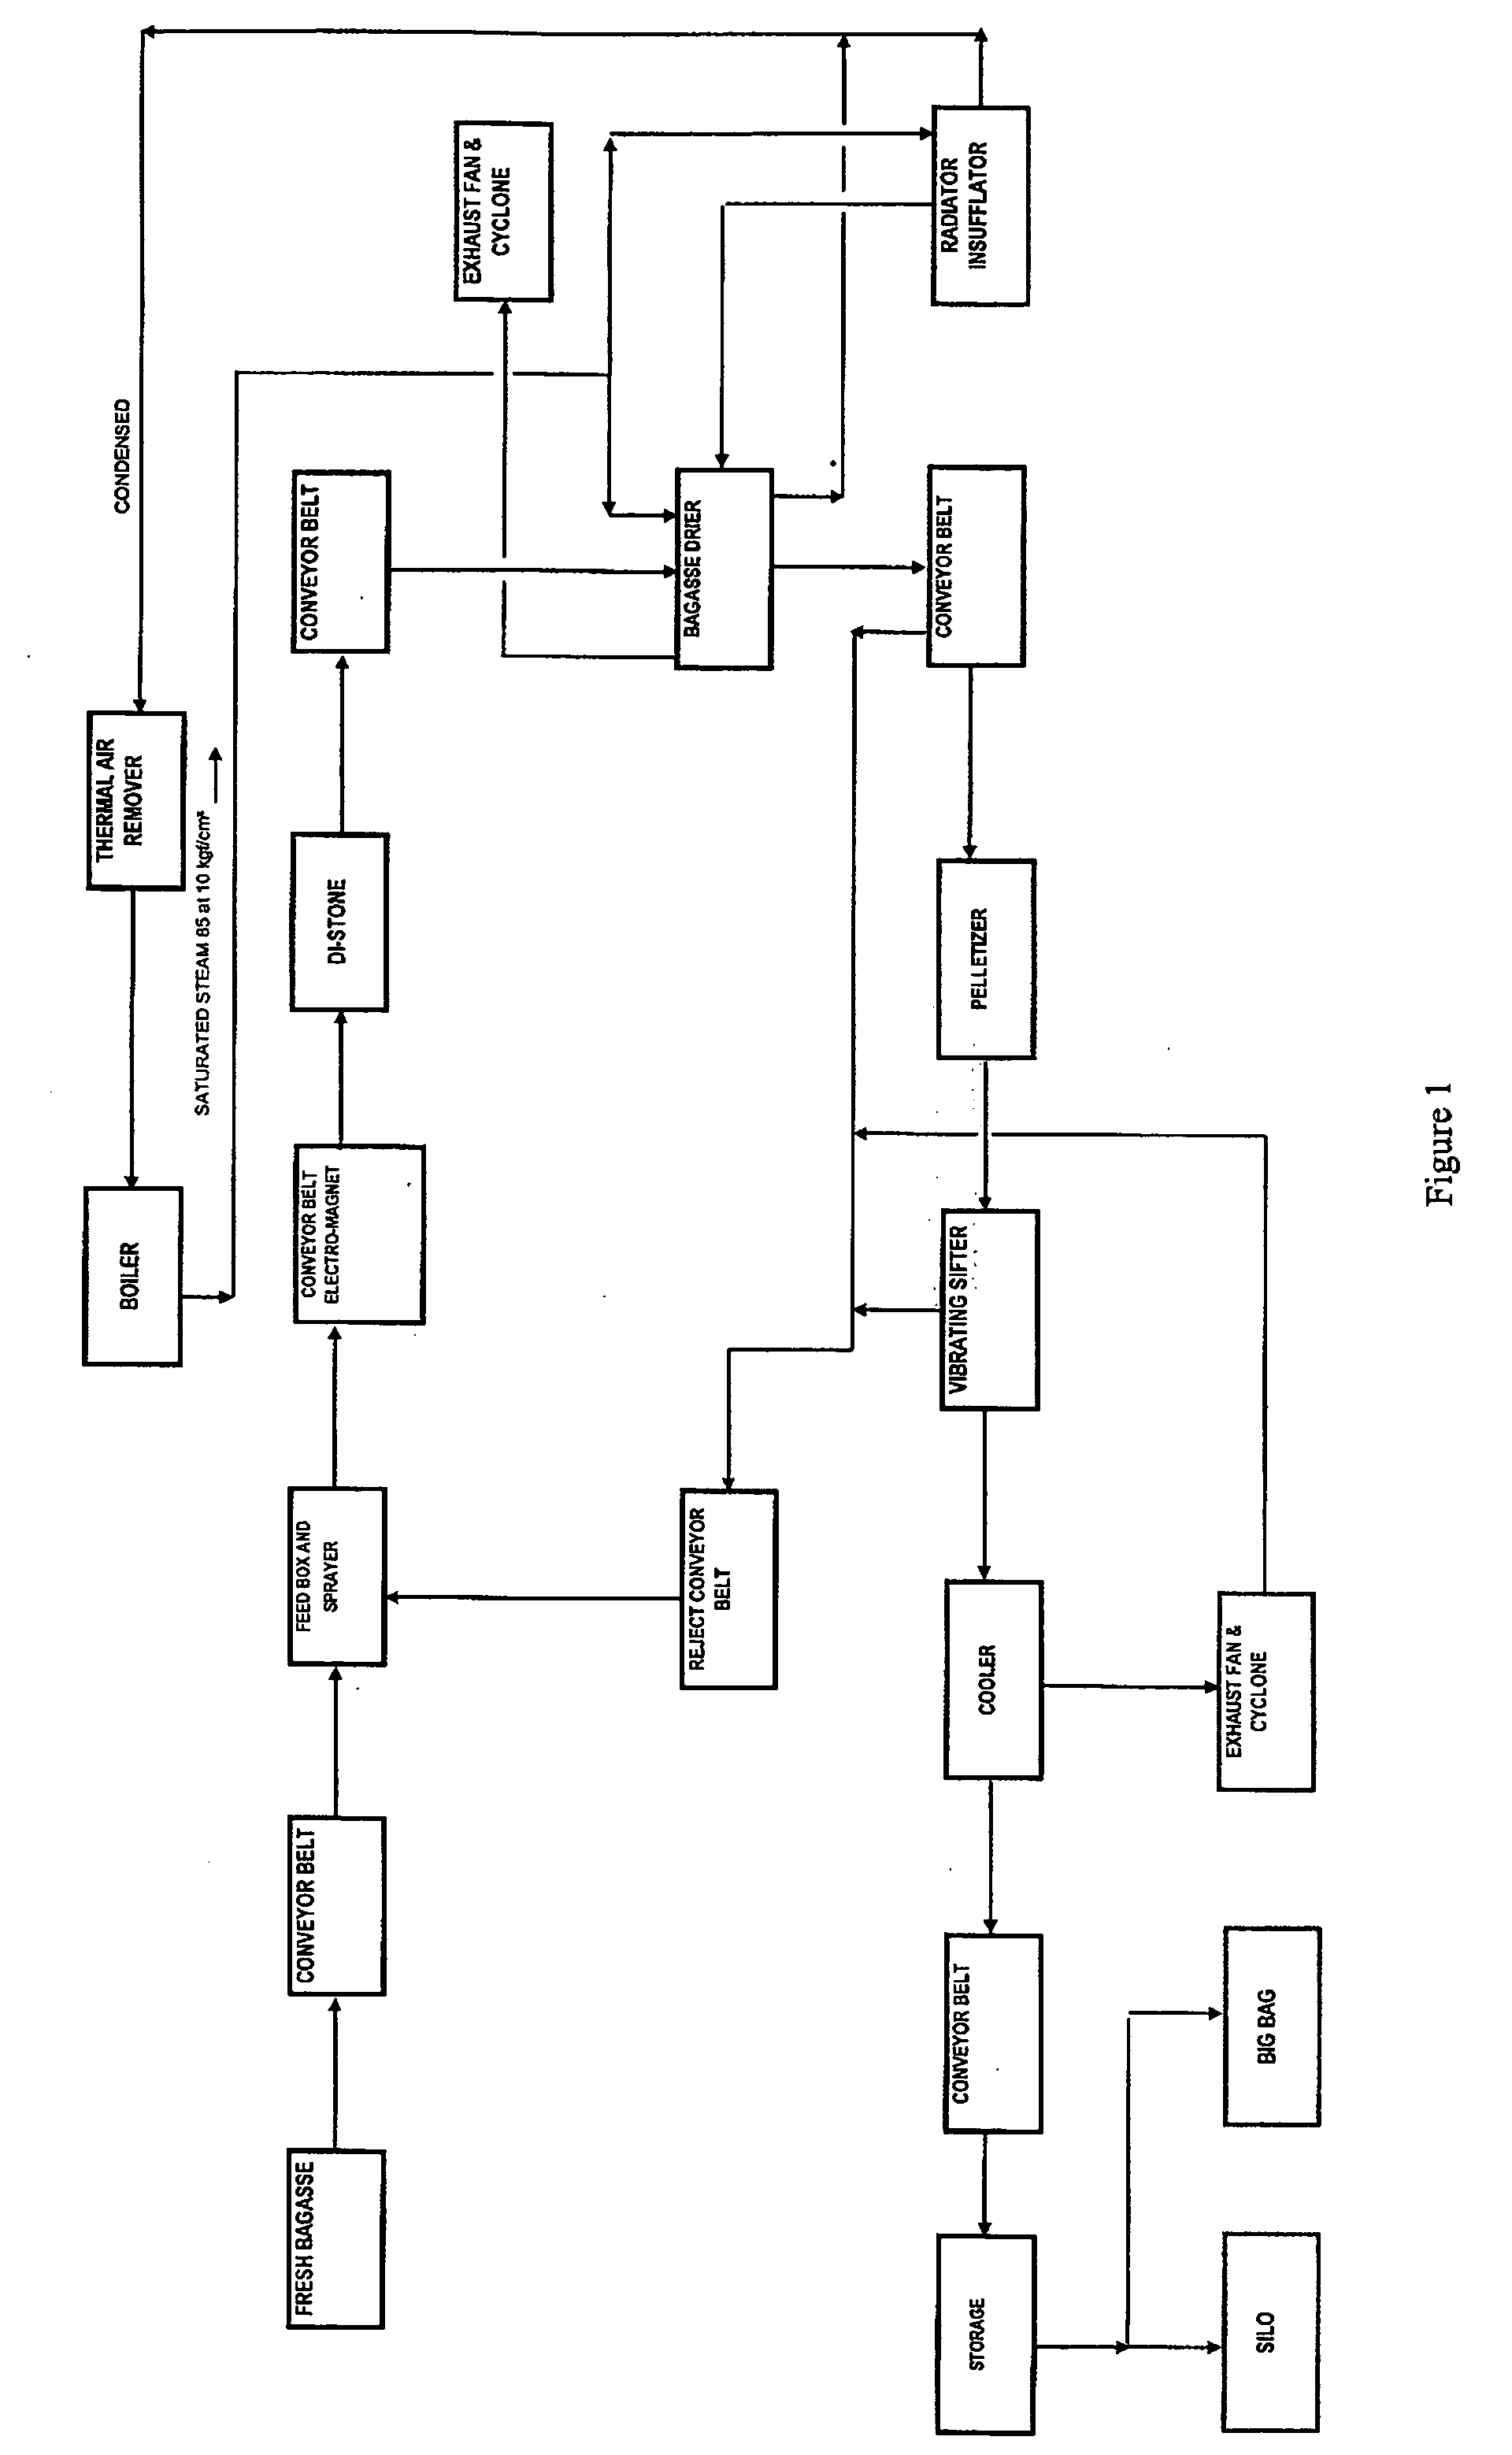 Method and device for pelletizing unprocessed cellulosic fibrous material